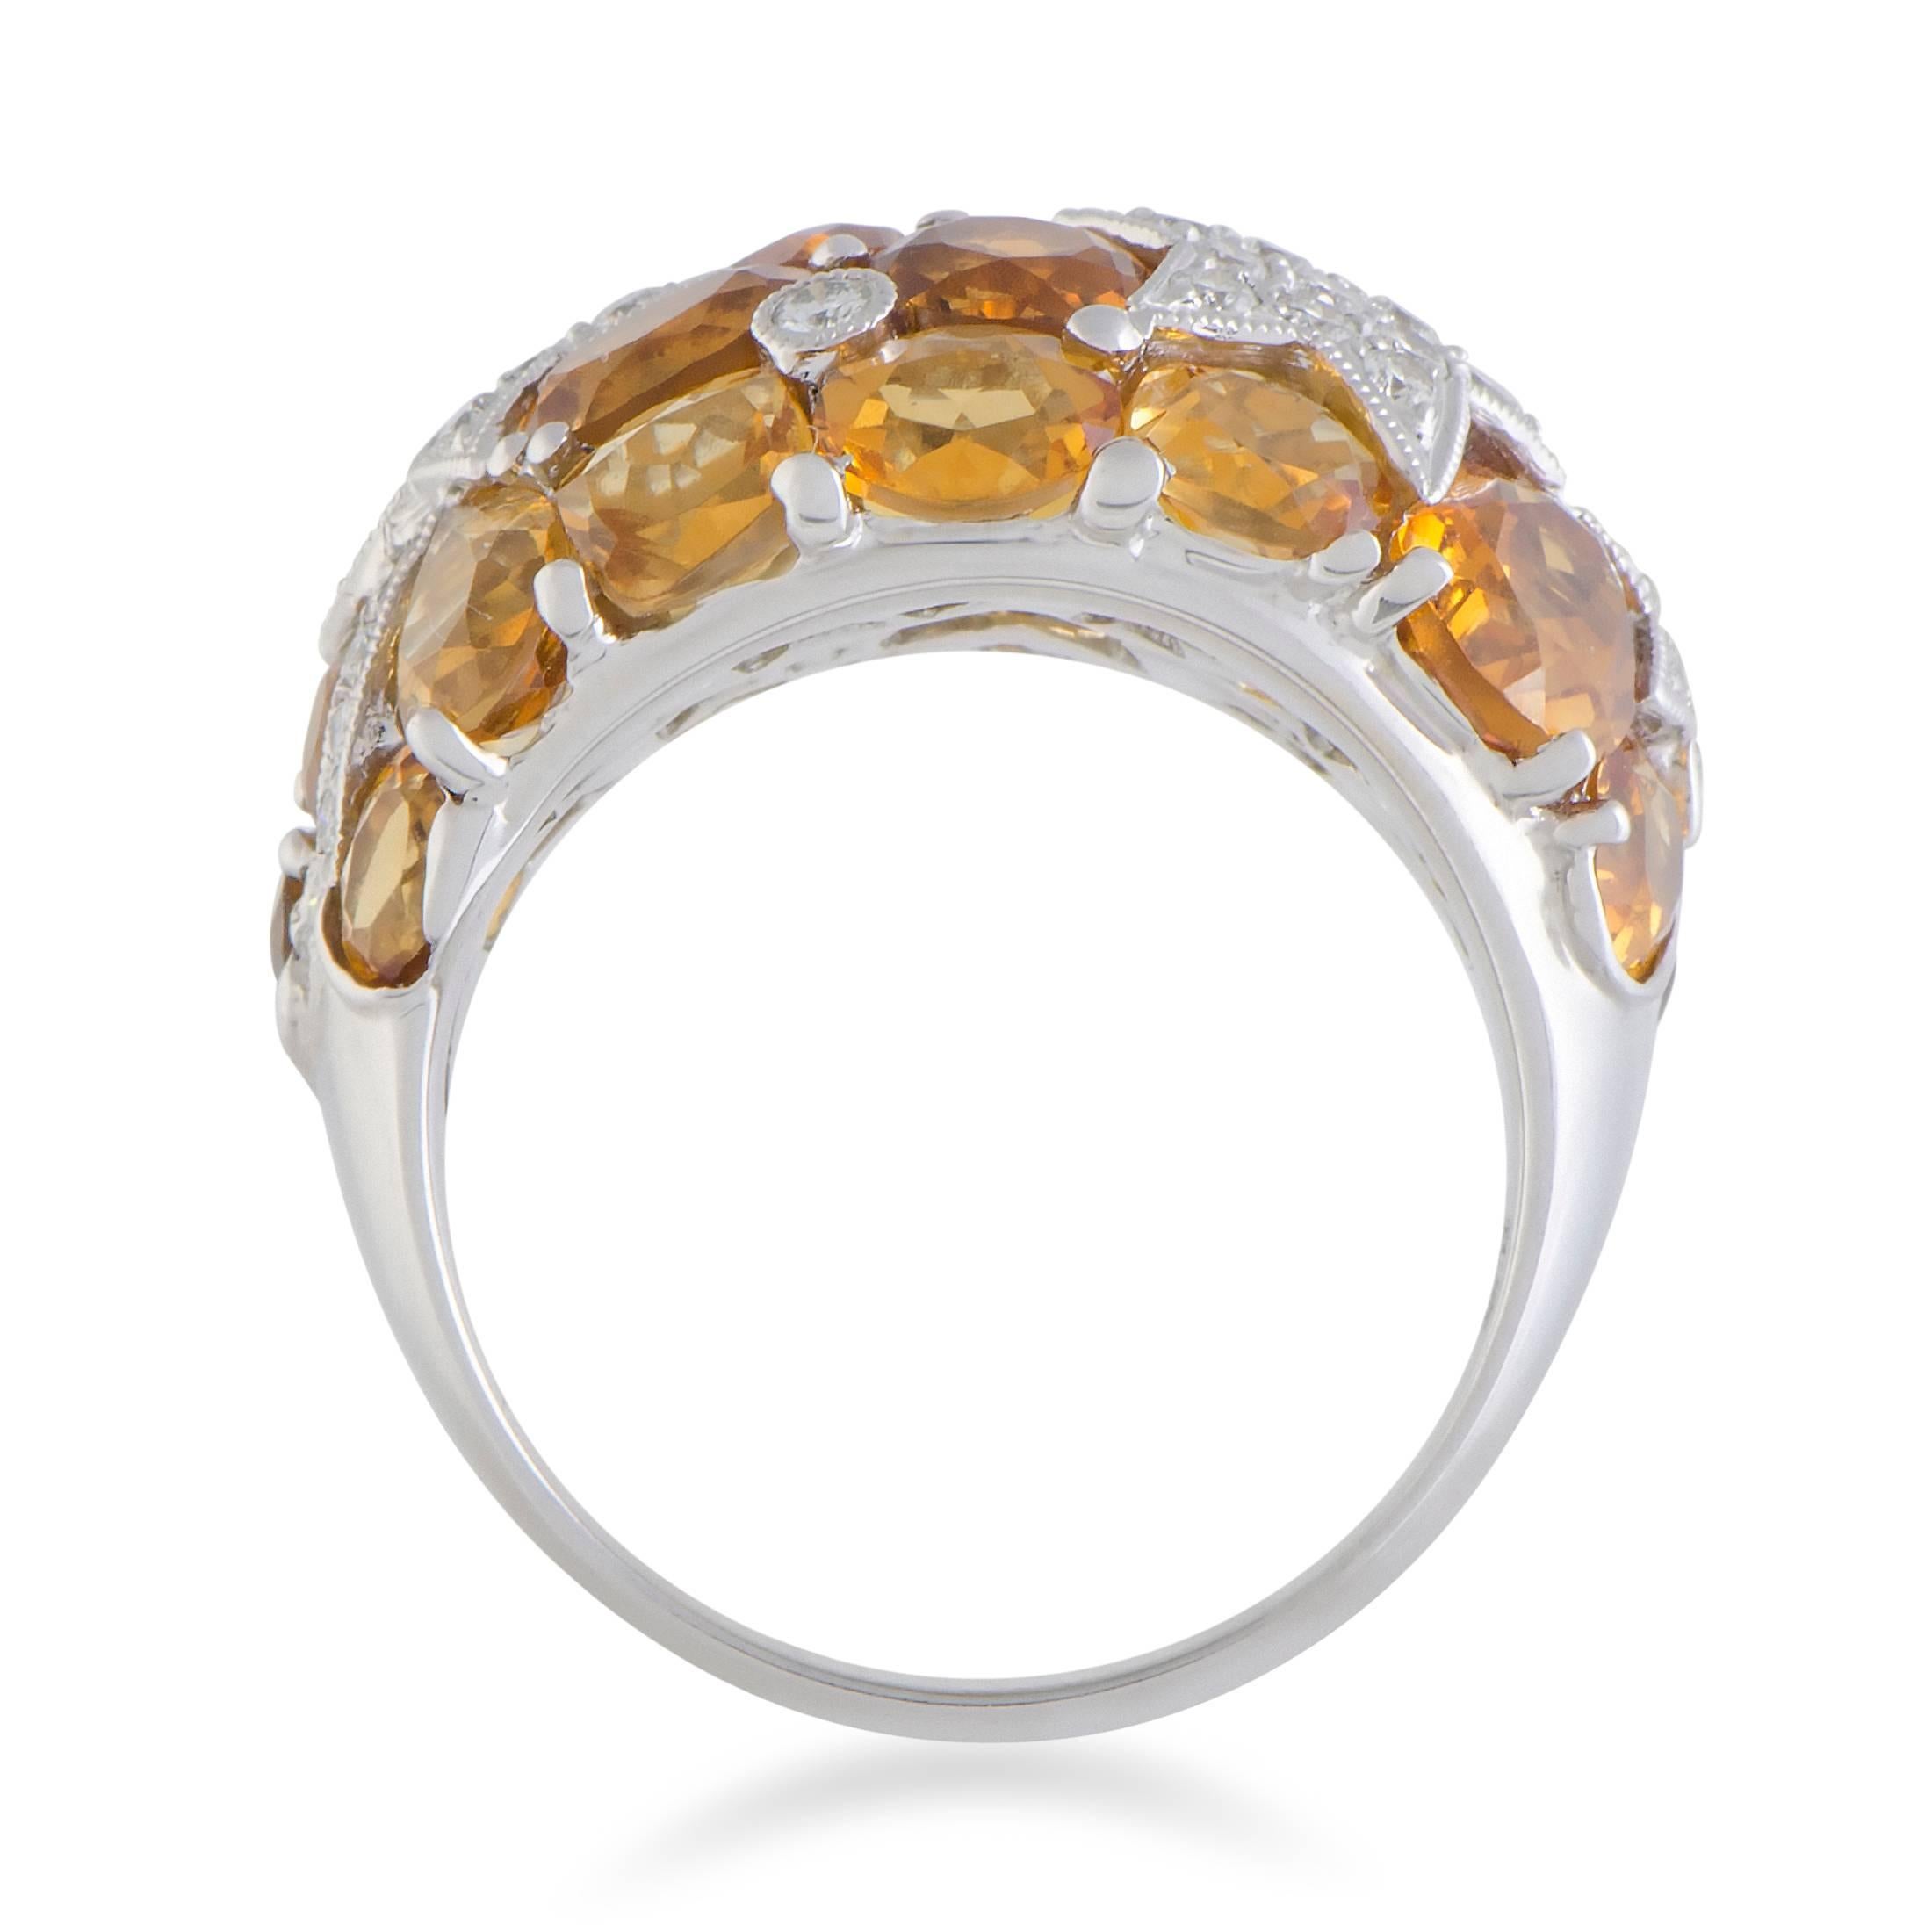 This breathtaking ring is beautifully designed in 18K white gold. The ring displays an exquisitely charming appeal with its extravagant embellishment of 0.51ct diamonds and 8.50ct of exquisite citrine stones that make the piece sensational!
Ring Top